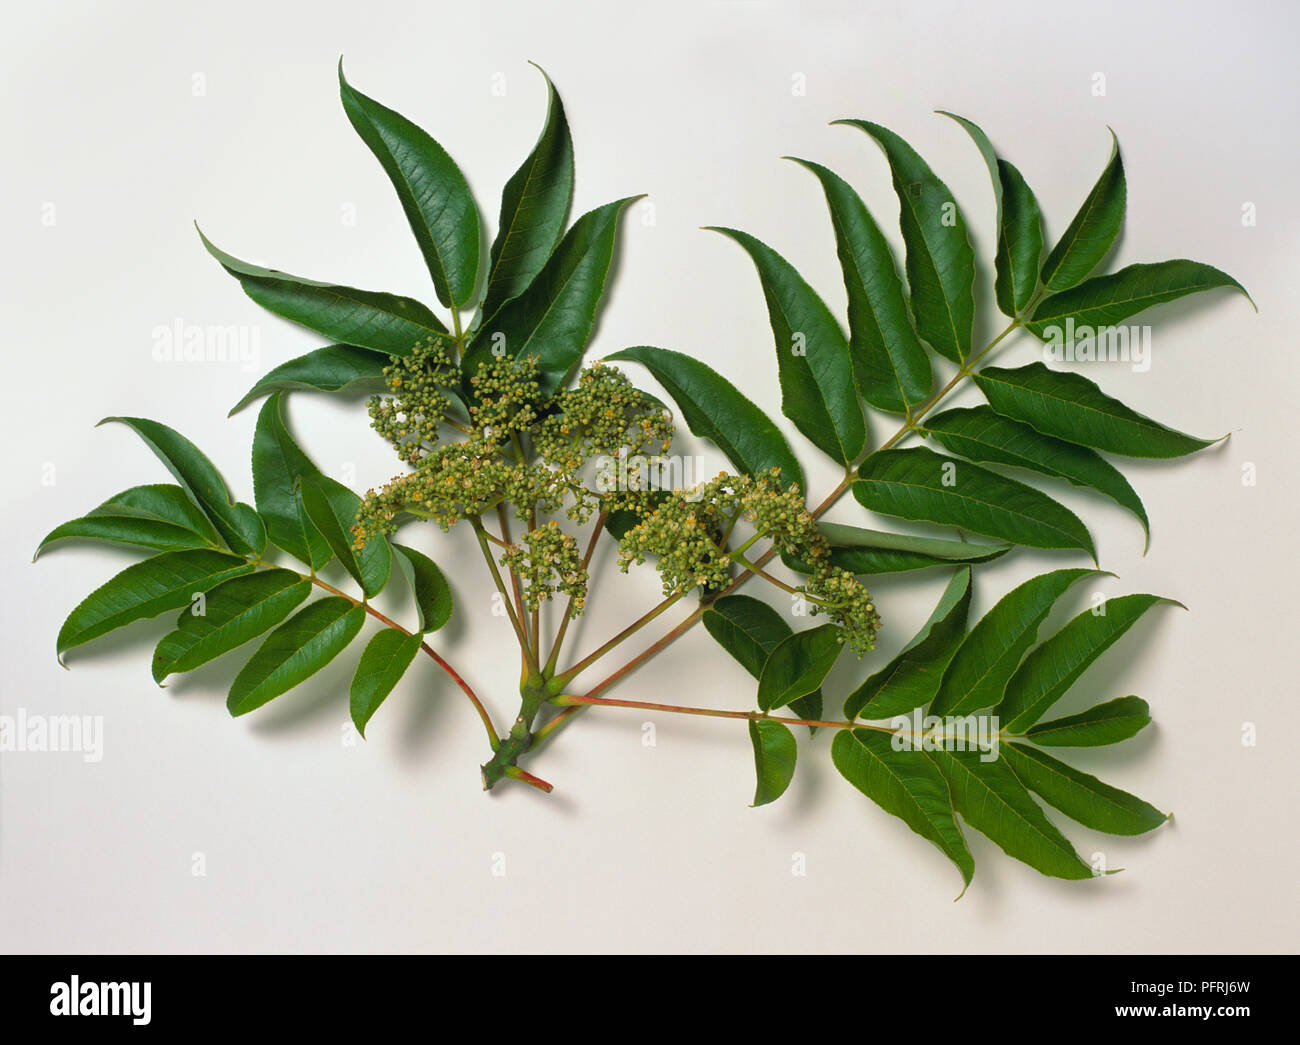 Zanthoxylum ailanthoides (Prickly ash), stem with leaves and flowers Stock Photo